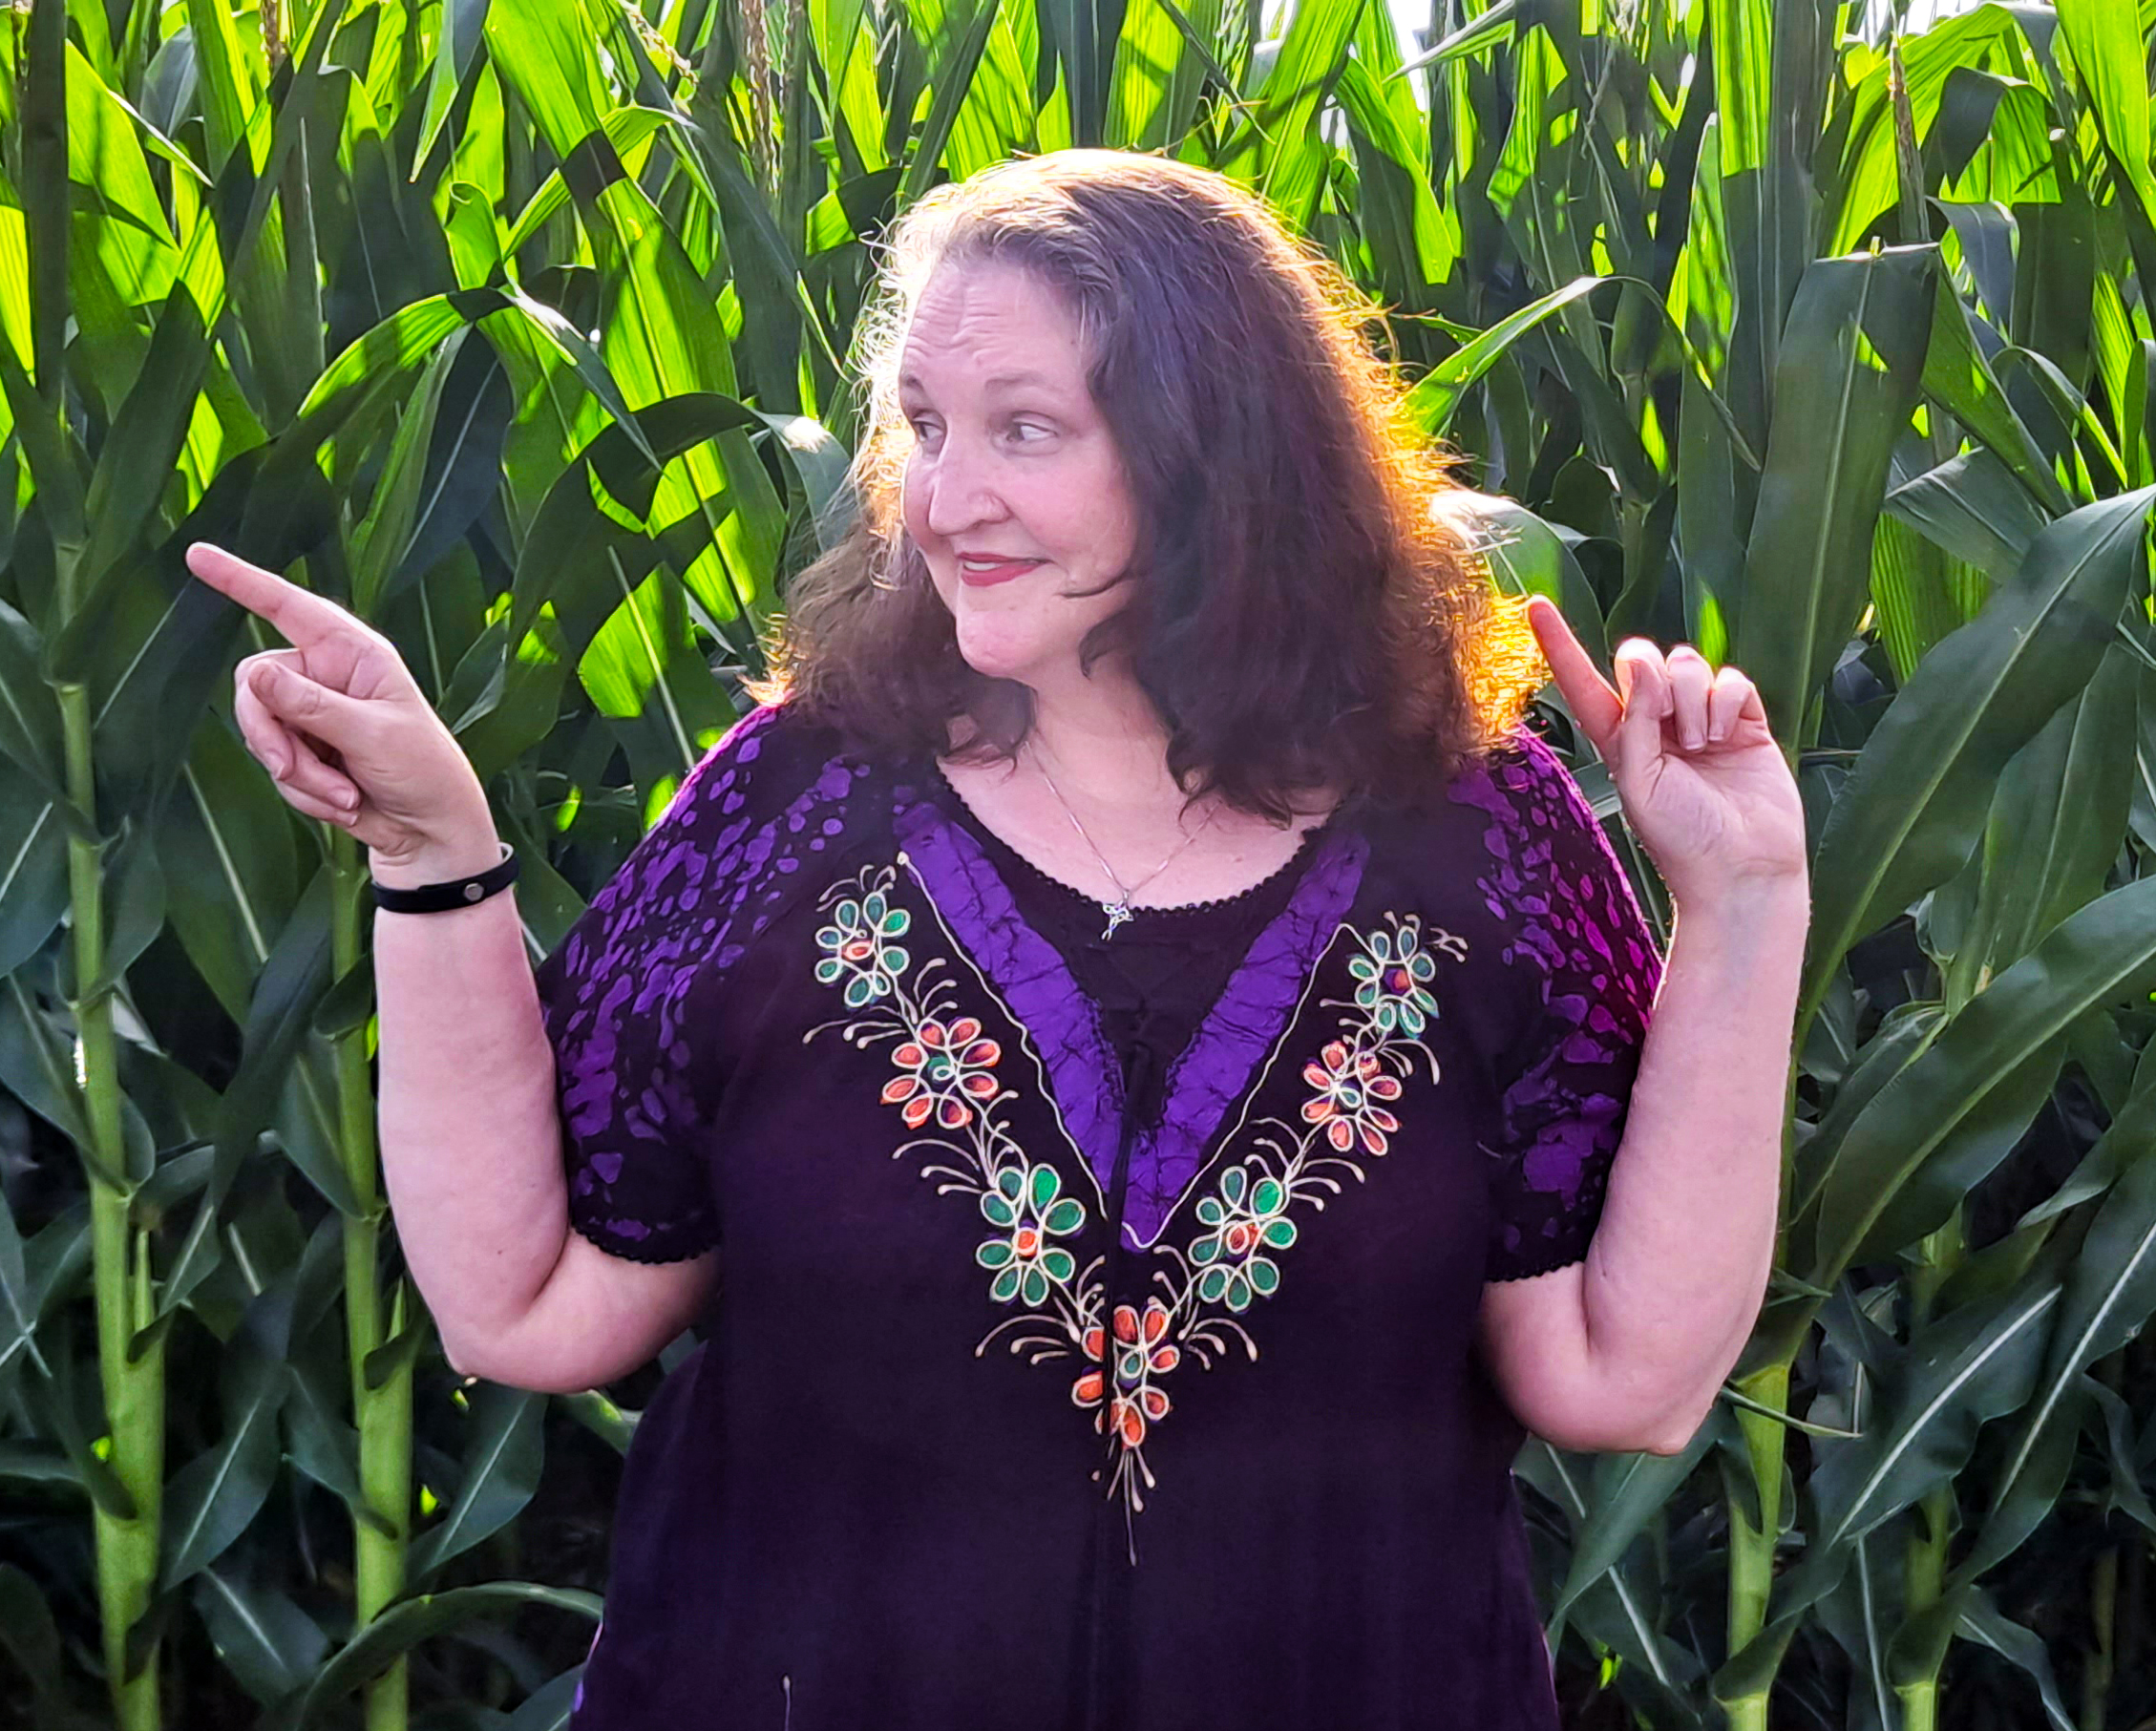 carma pointing left in front of corn